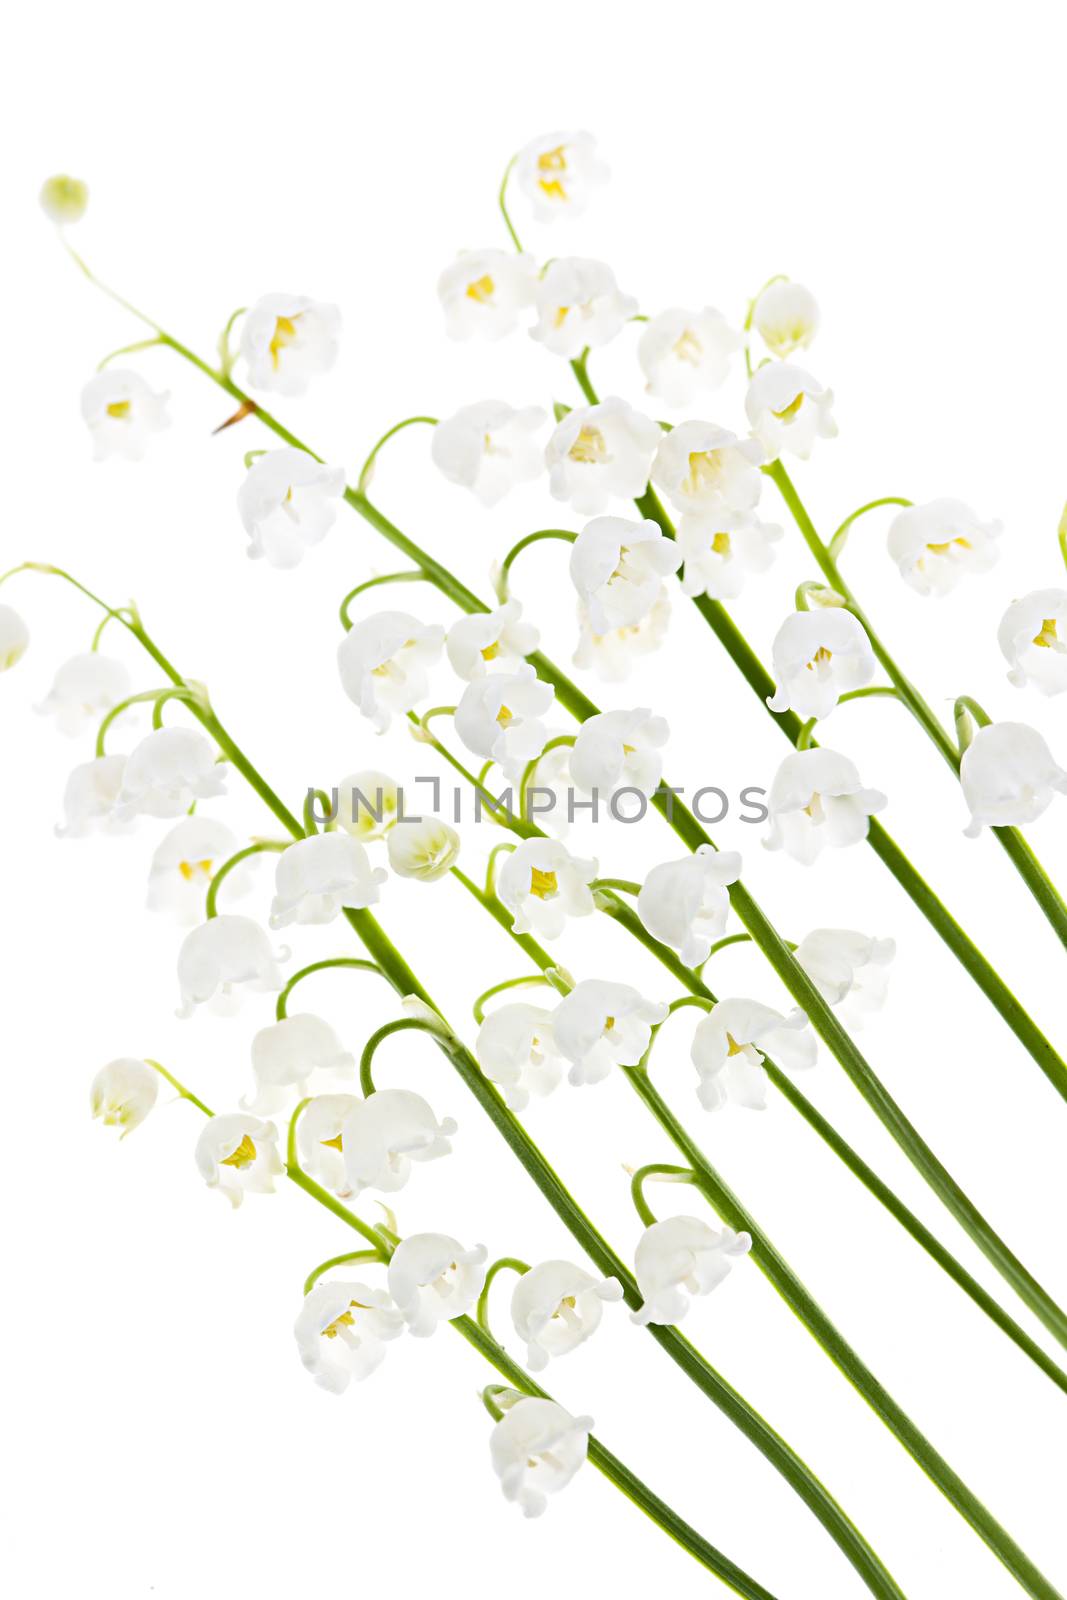 Lily of the valley flowers isolated on white background